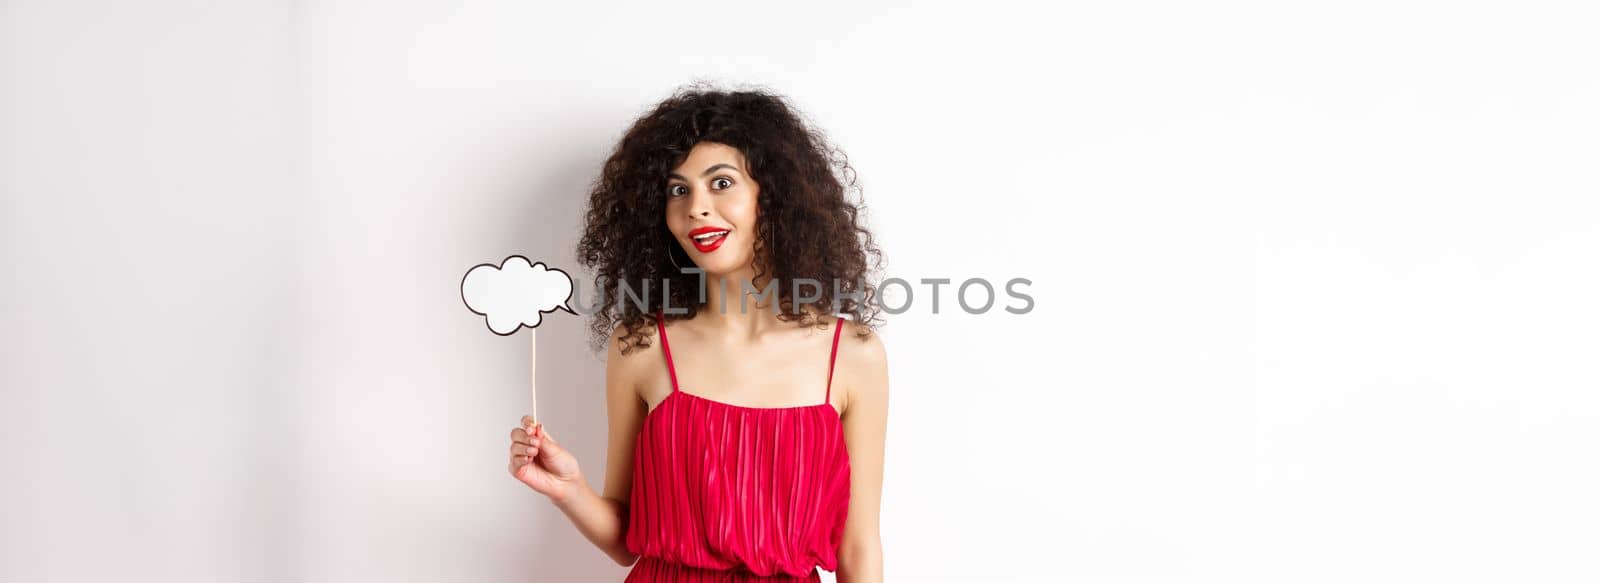 Beautiful woman with curly hair, wearing red dress, holding comment cloud, say something, standing on white background.